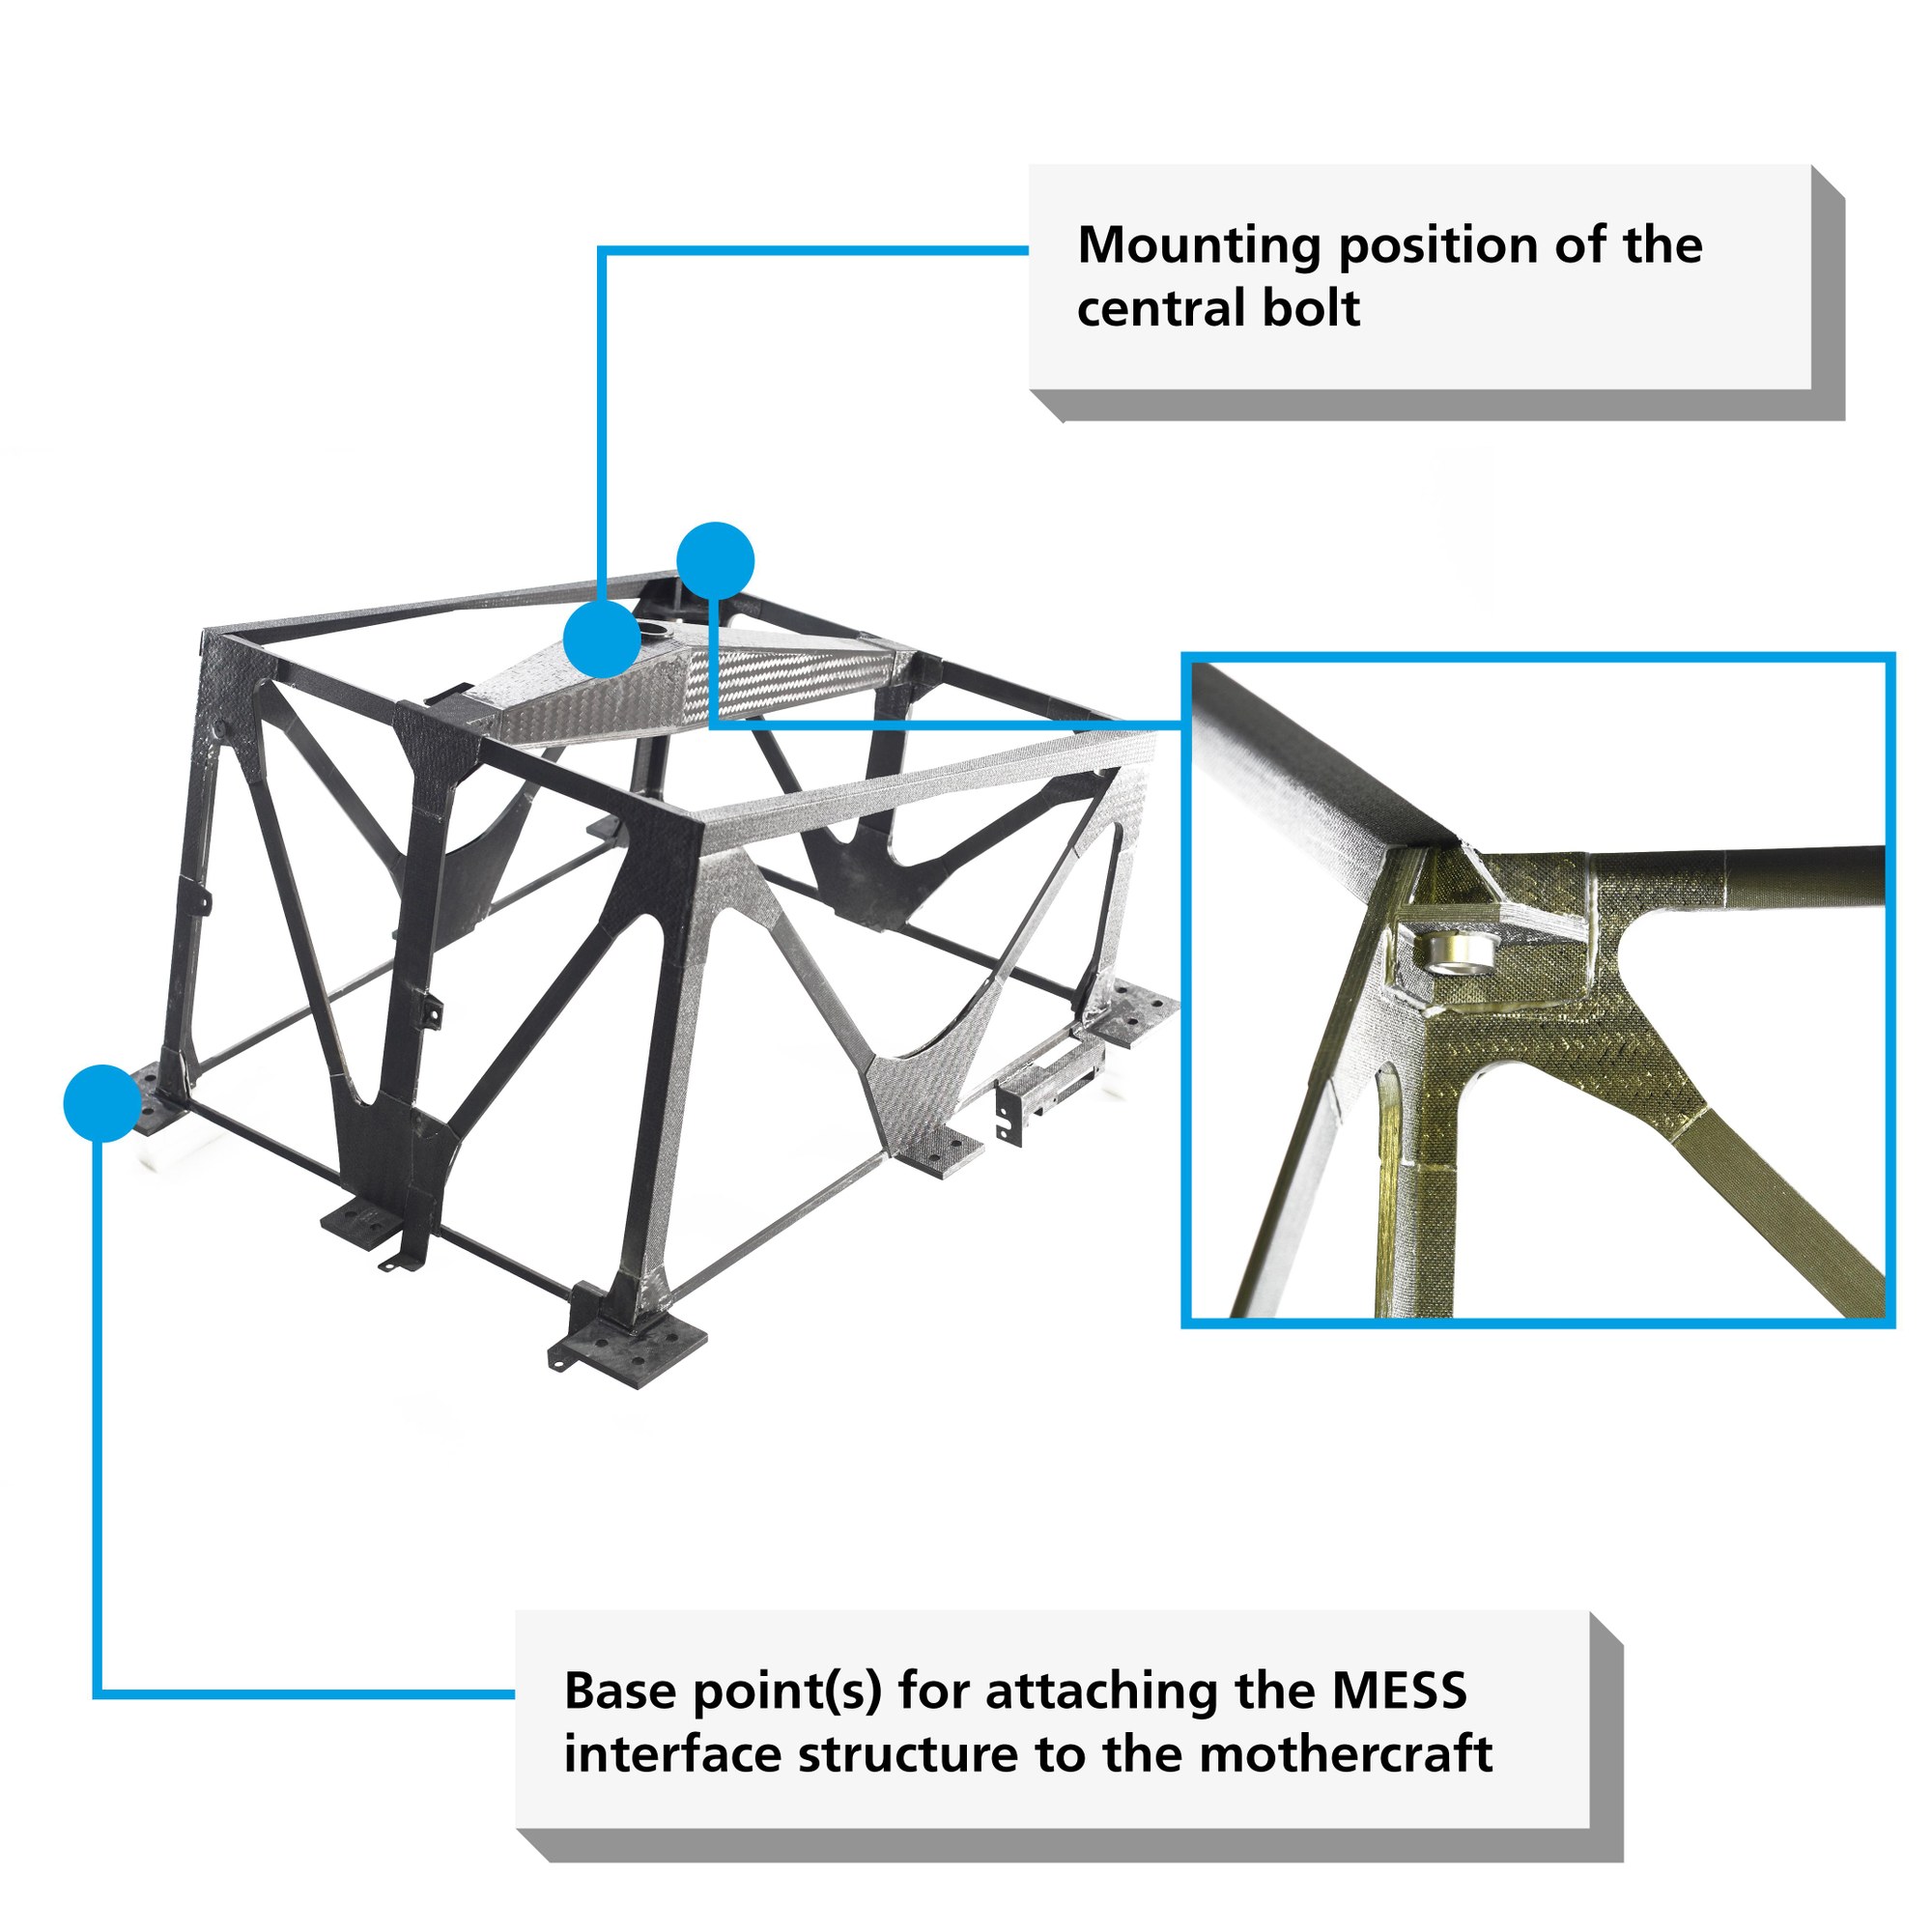 Mechanical and electrical interface structure (MESS) that forms the interface between the Hayabusa2 mothercraft and the MASCOT lander